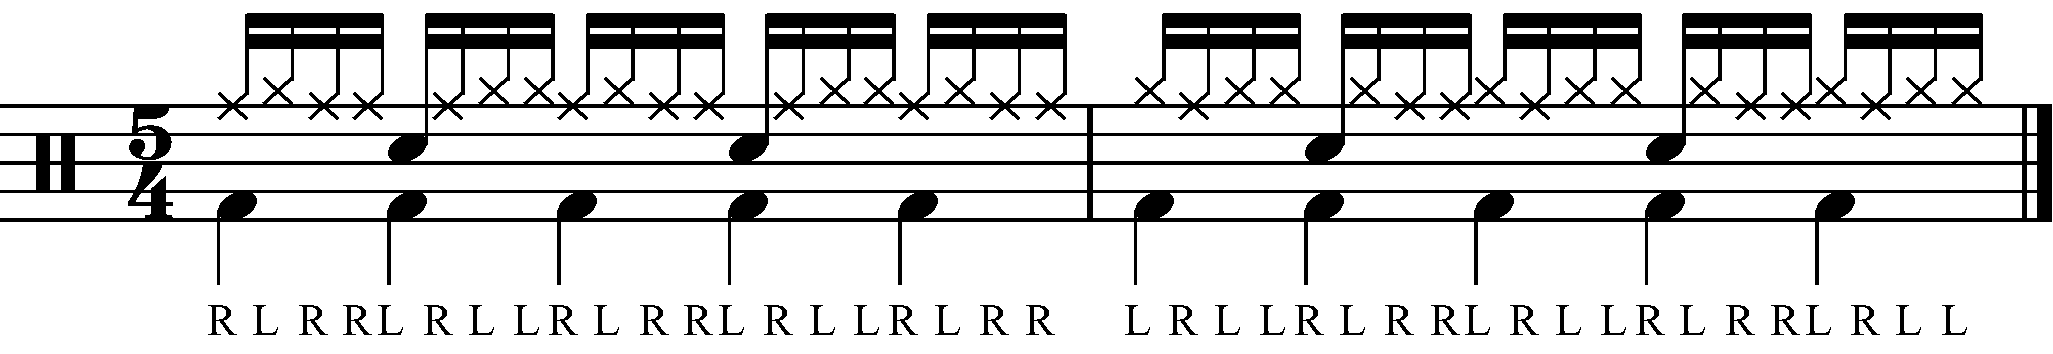 A 5/4 common time paradiddle groove